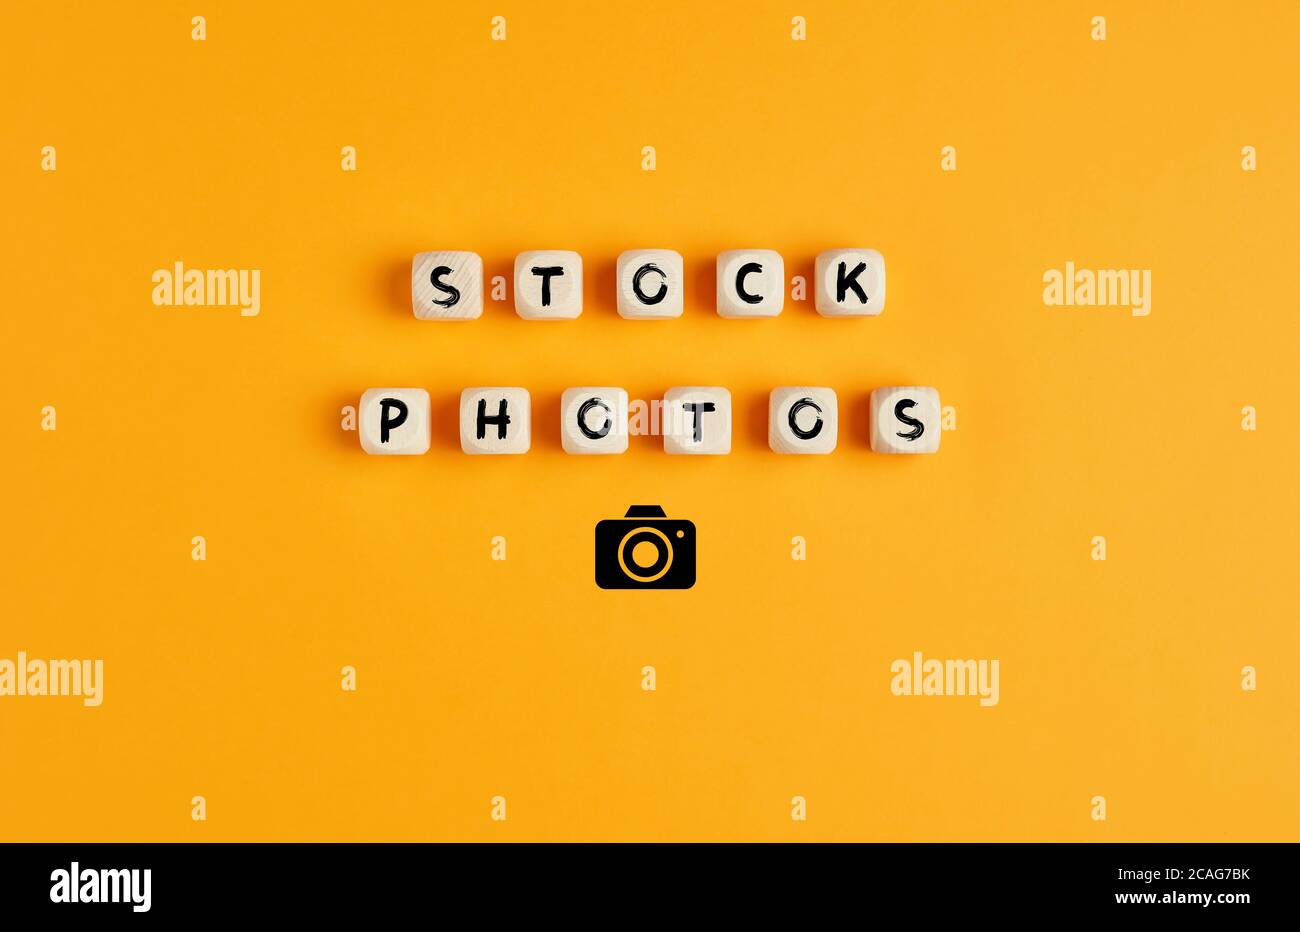 The words stock photos on wooden cubes with camera icon against yellow background. Stock phorography or phoro library concept. Stock Photo